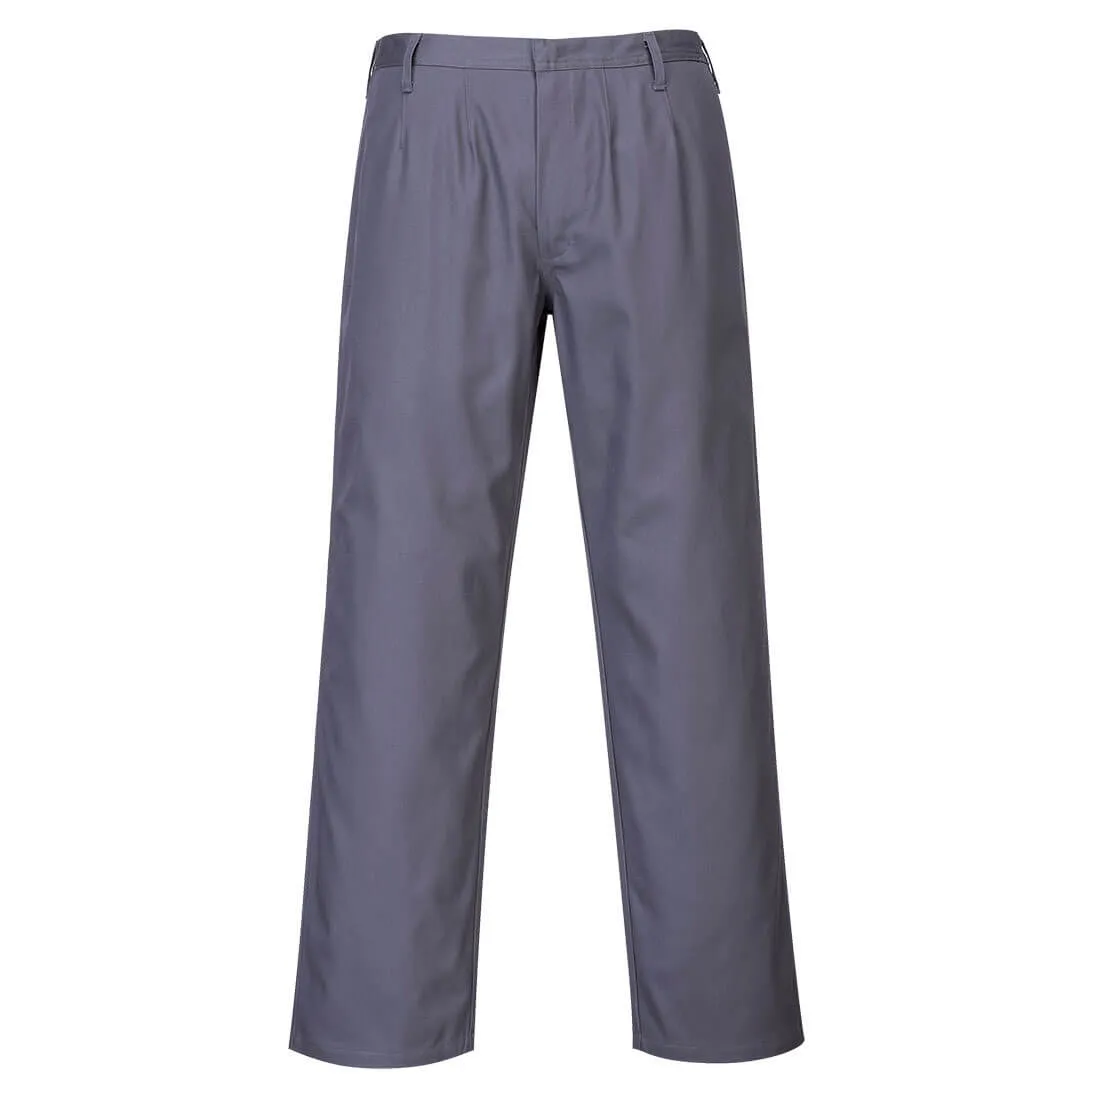 Biz Flame Pro Mens Flame Resistant Trousers - Grey, Large, 32"